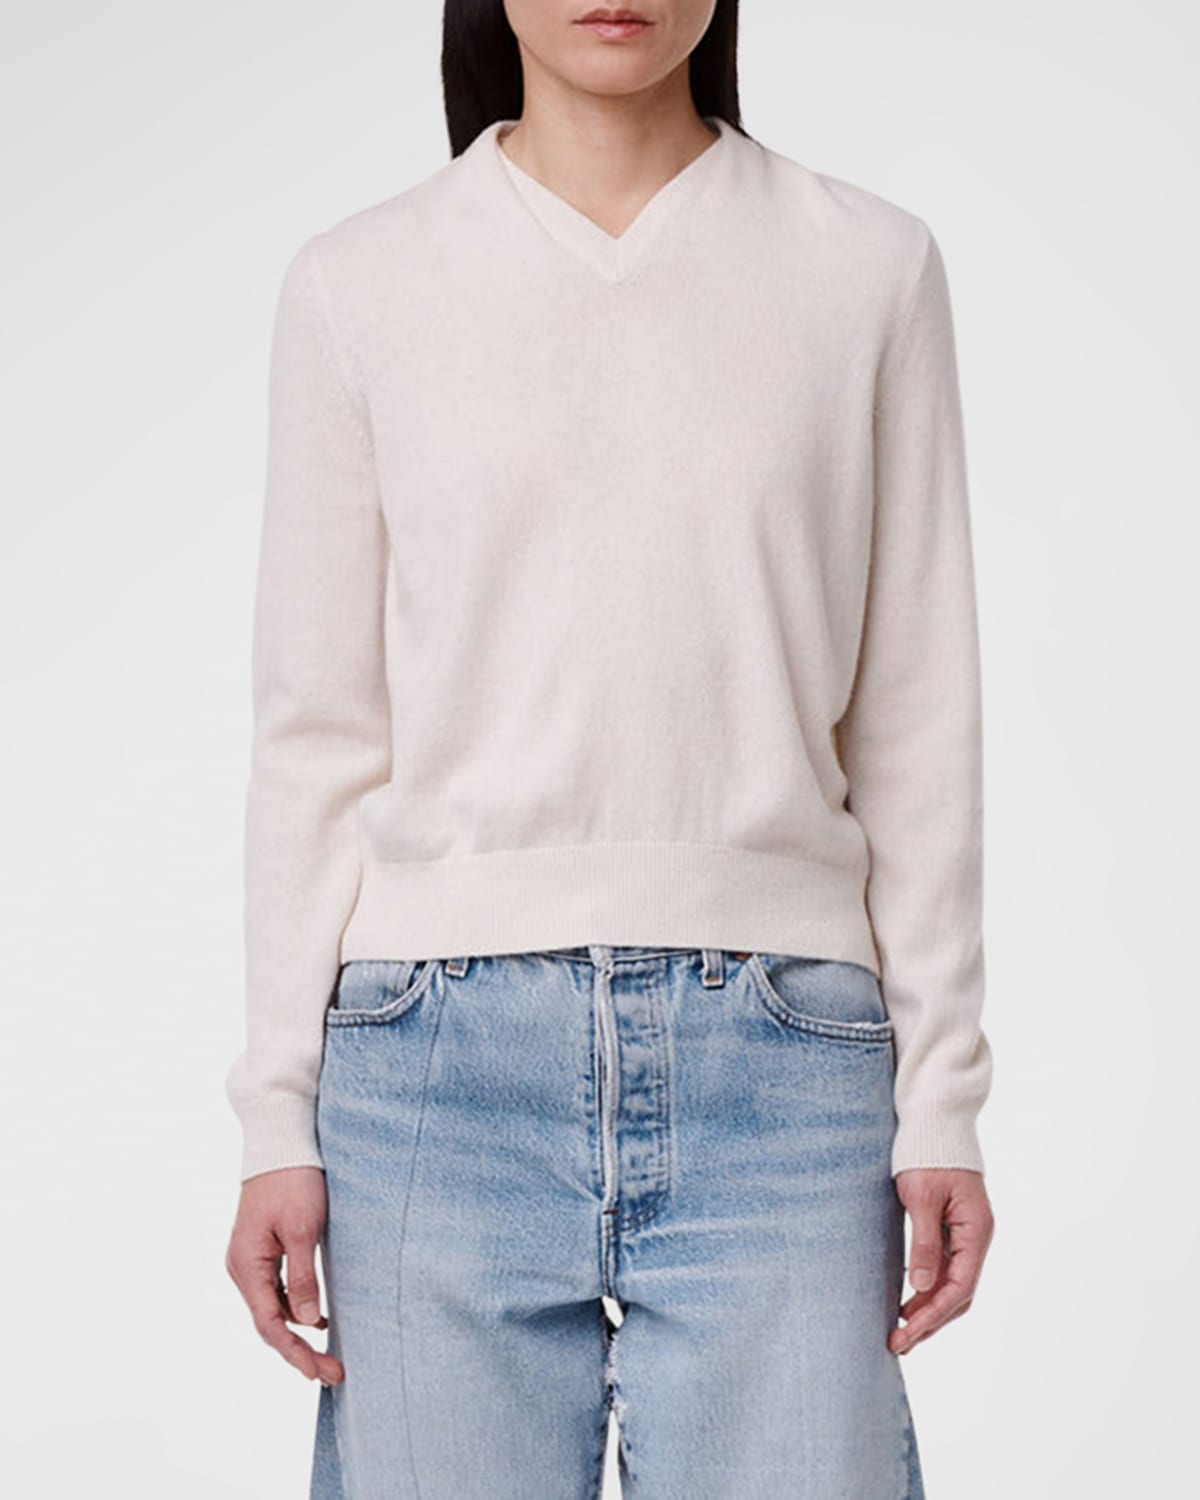 Another Tomorrow Draped Neck Sweater In Off White